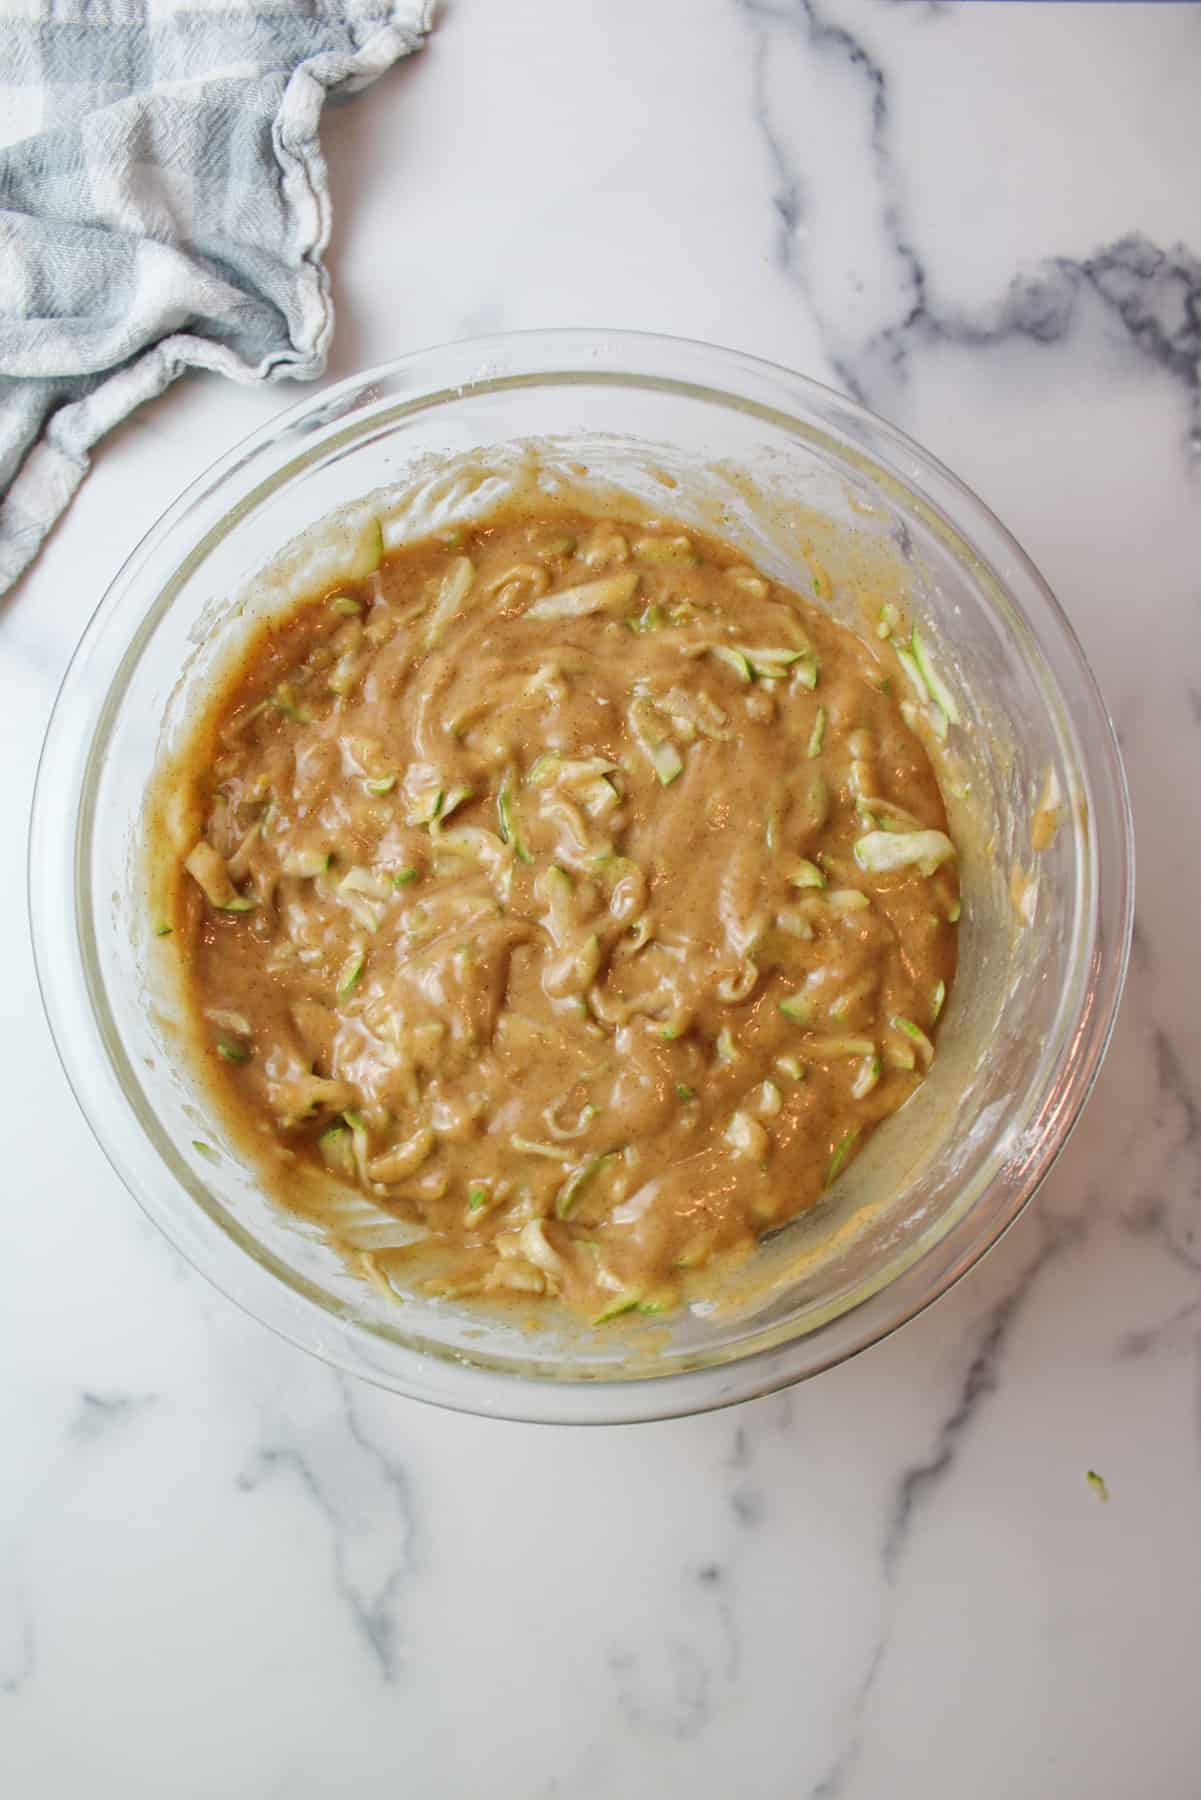 zucchini bread batter in a mixing bowl